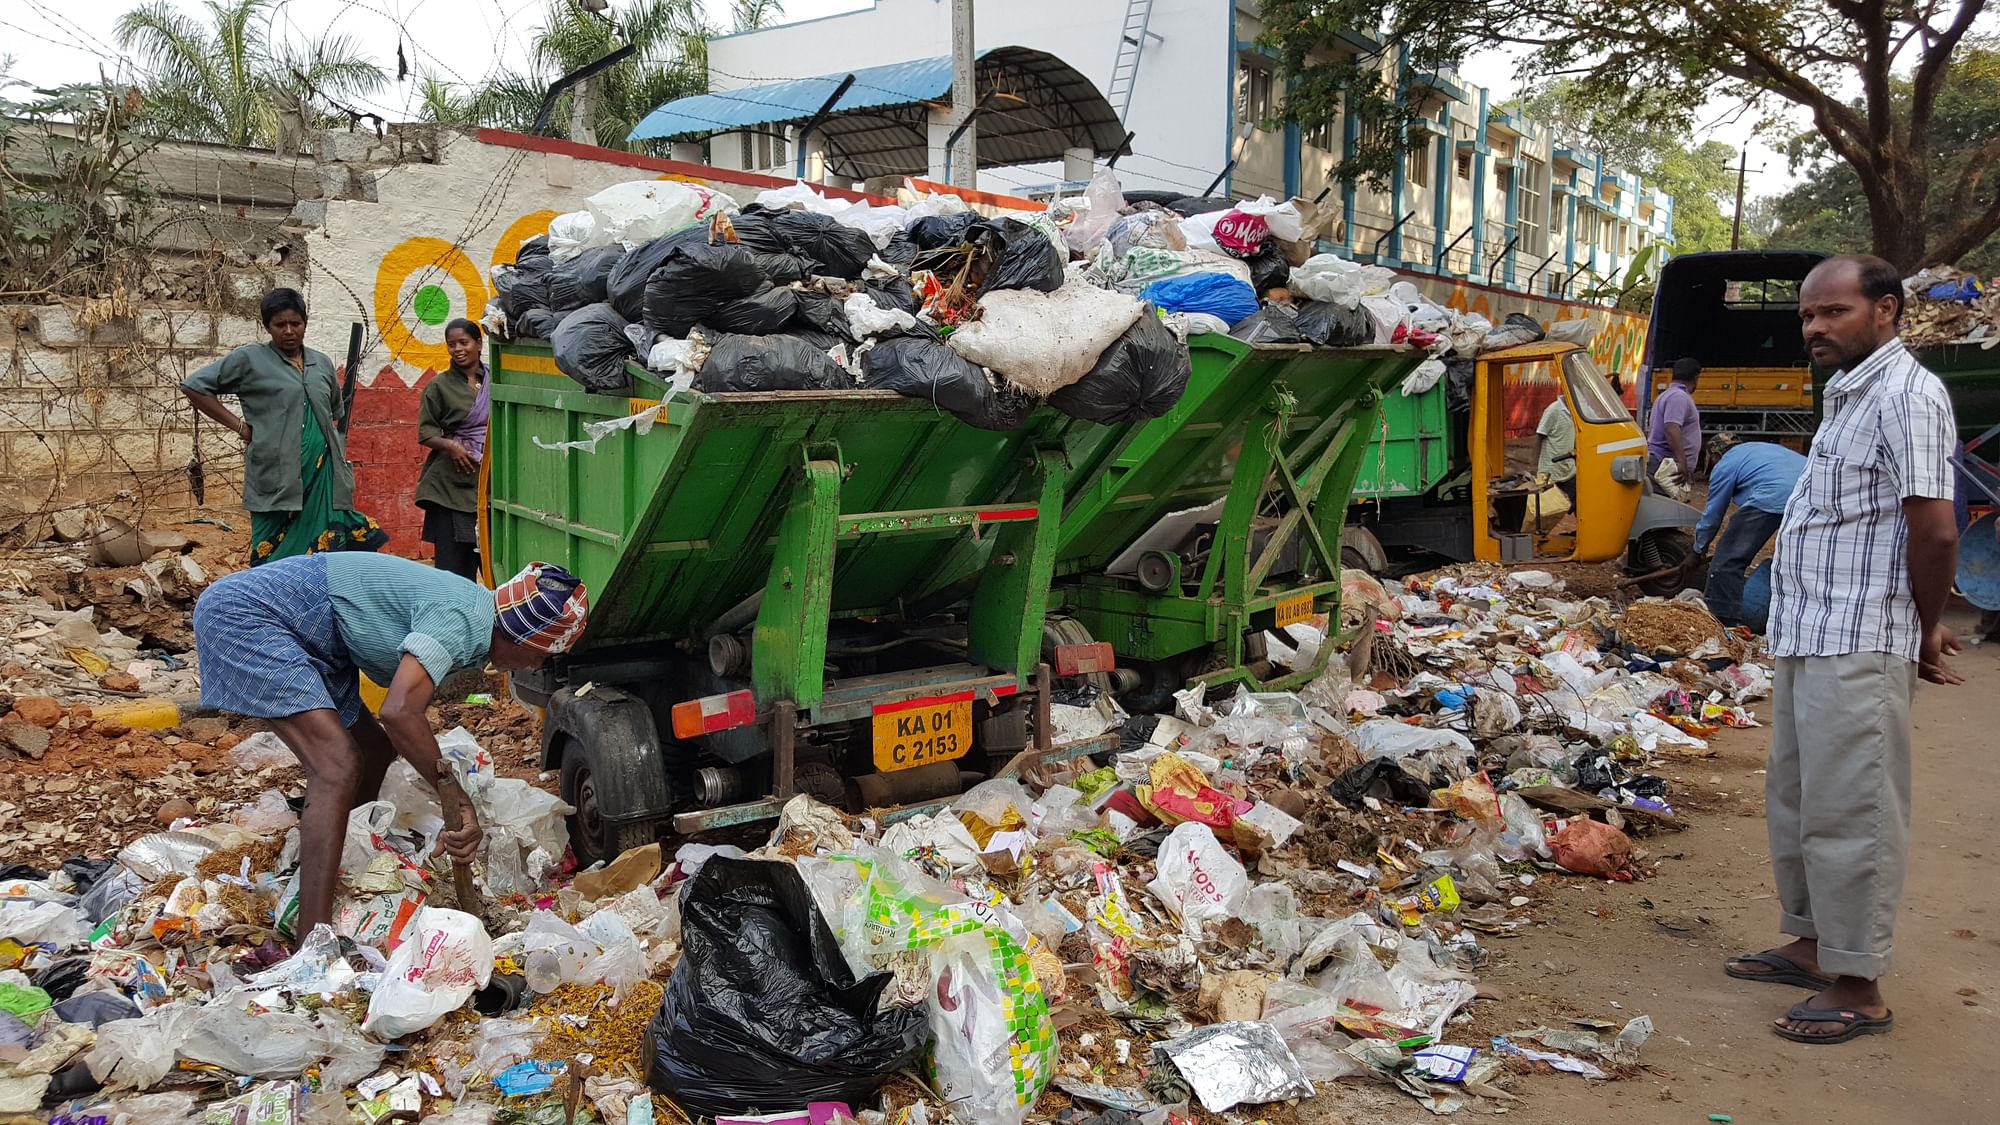 The garbage crisis in Bengaluru has turned into a ‘burning’ issue. (Photo: <b>The Quint</b>)